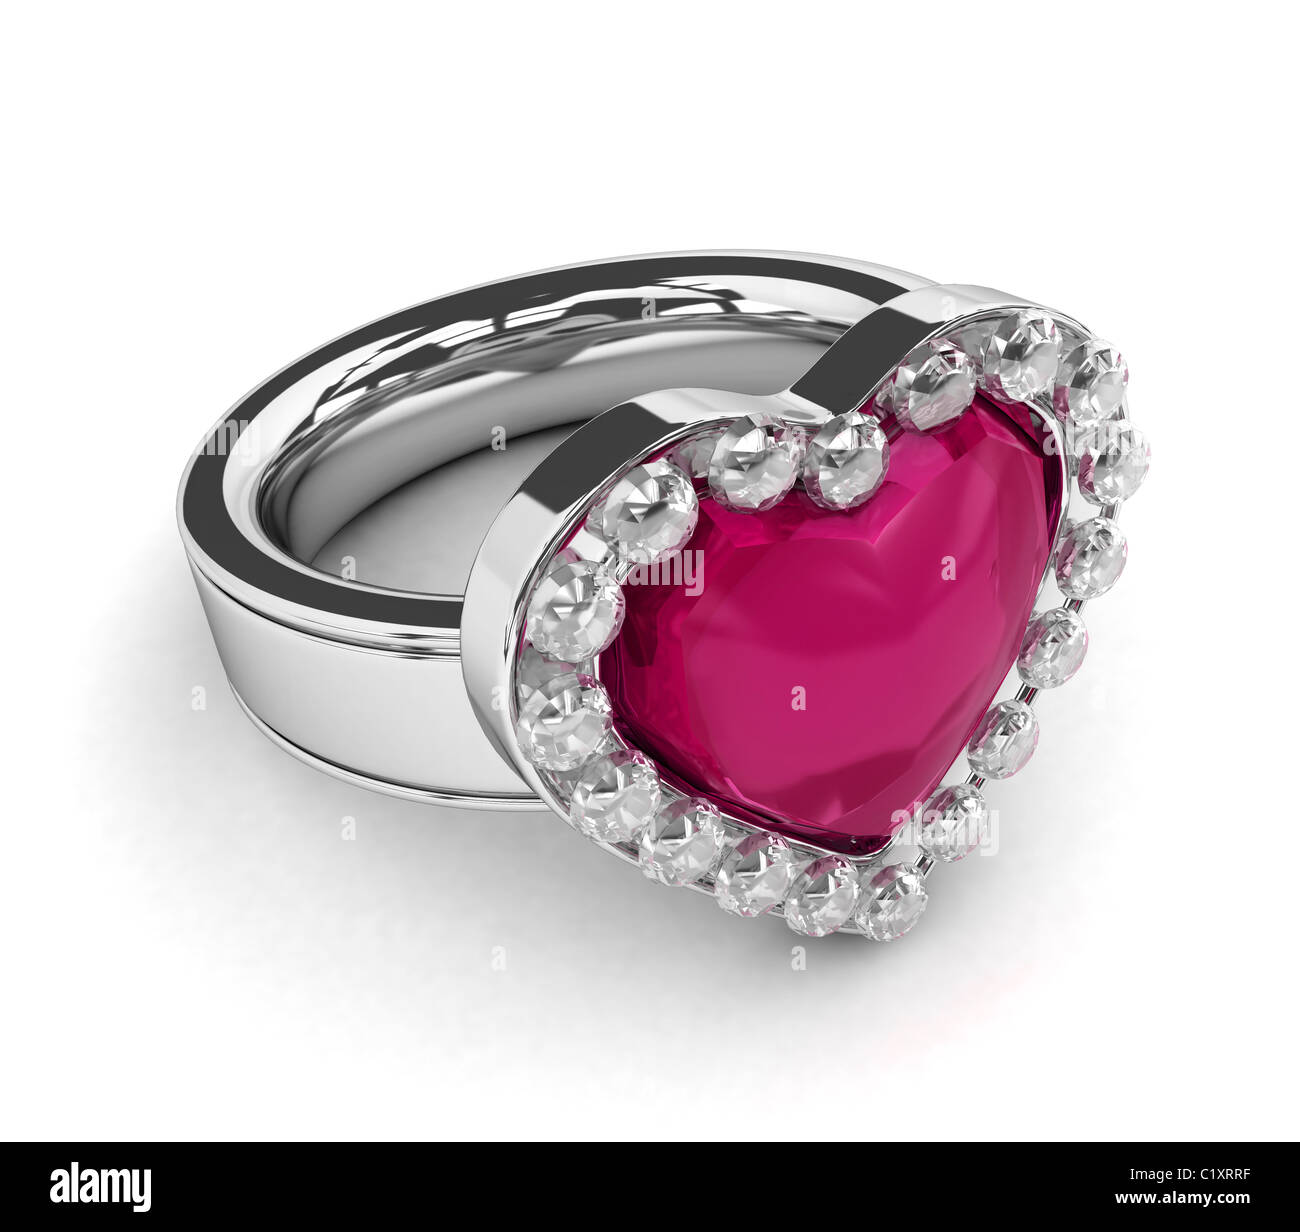 3D Illustration of a Diamond Encrusted Ring with a Heart-shaped Ruby on Top Stock Photo